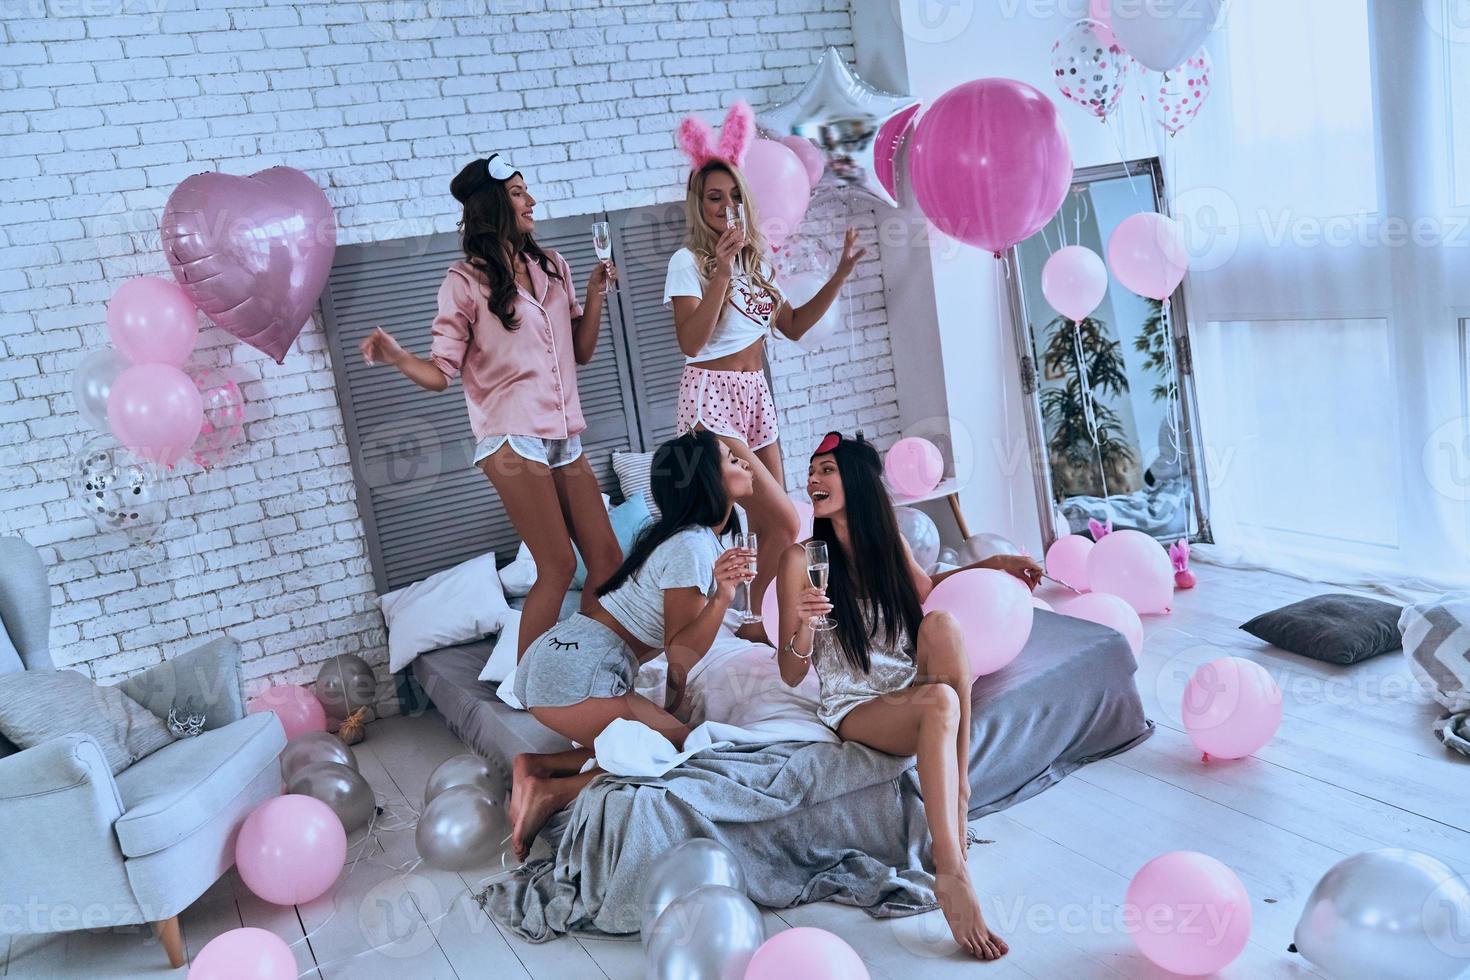 So much fun Four playful young smiling women in pajamas bonding together while having a slumber party in the bedroom with balloons all over the place photo